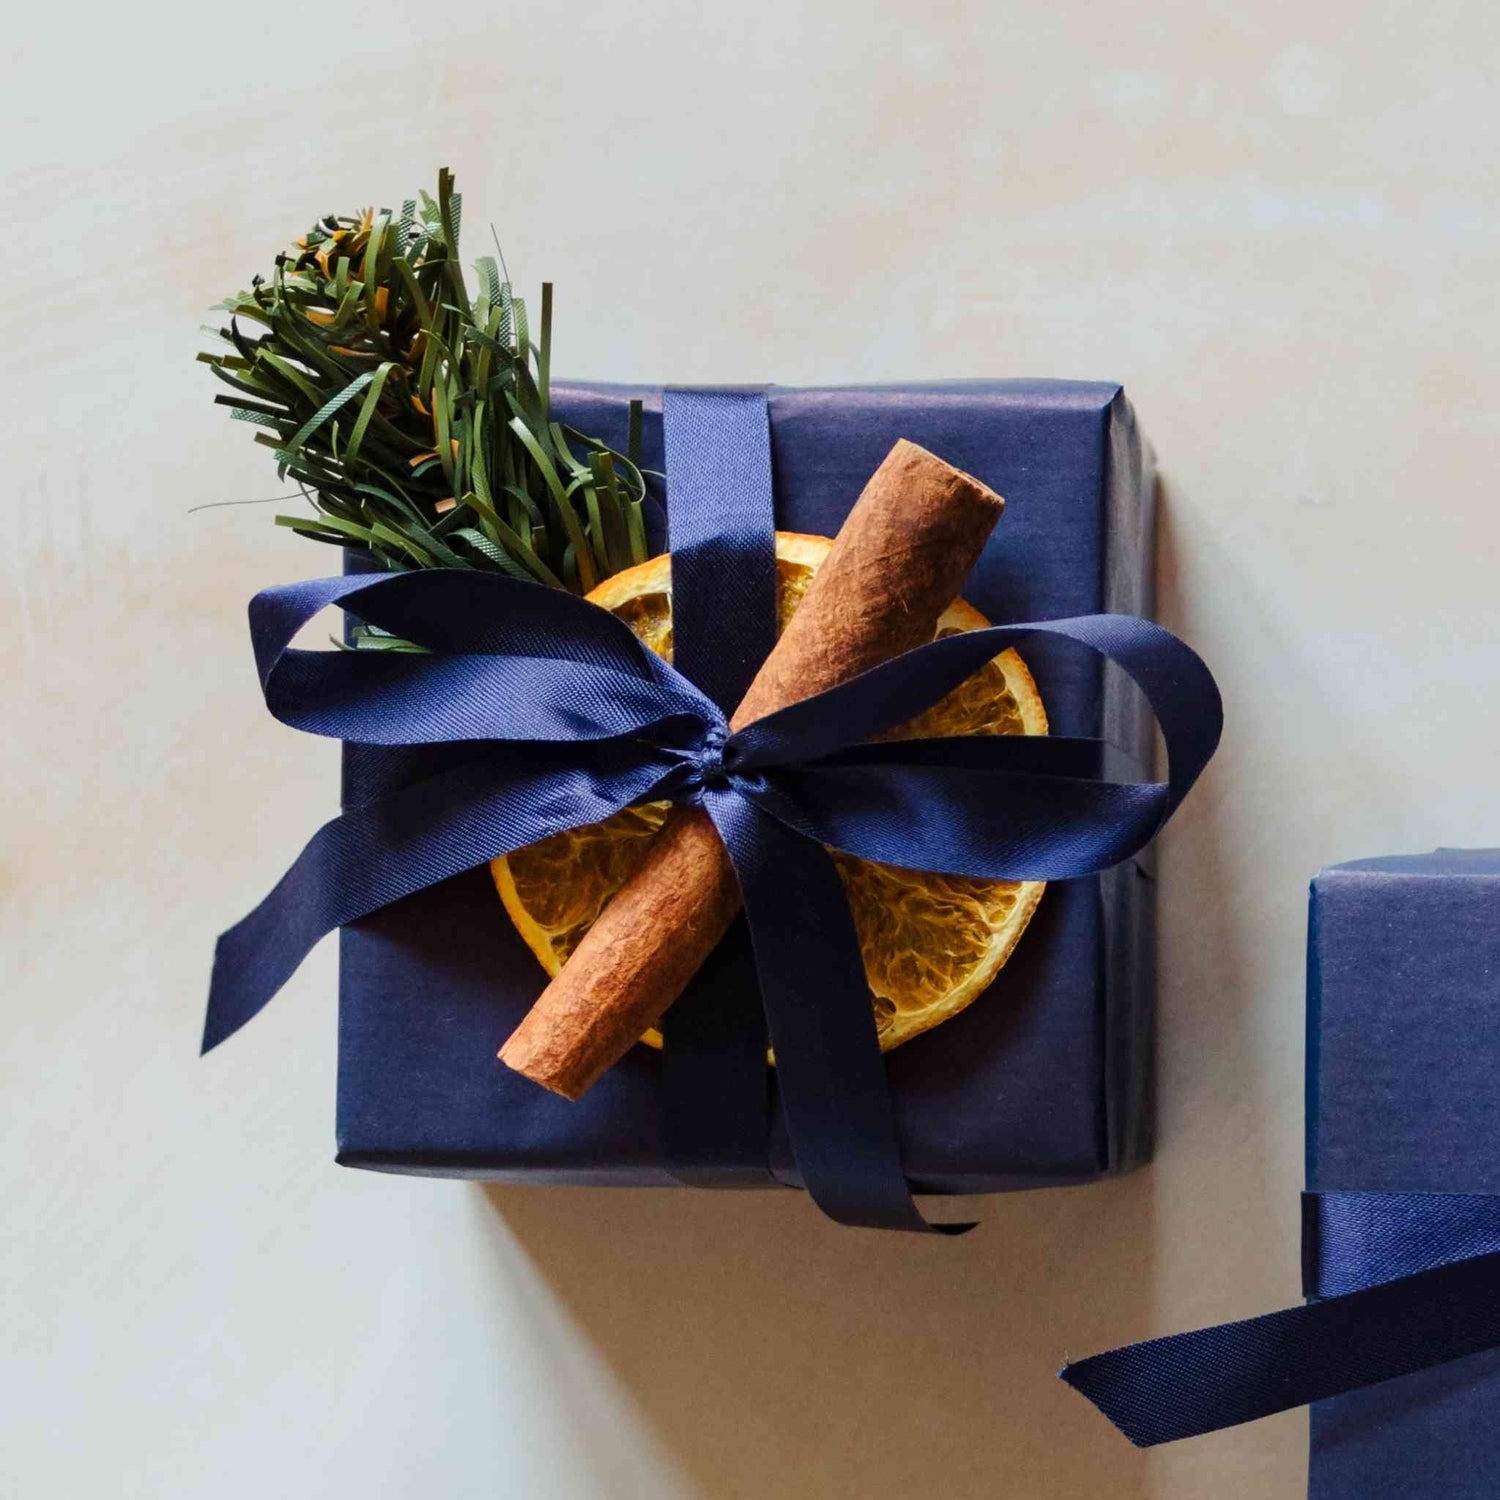 A 200g rose scented soy candle from the Home County Co. is shown with luxury Christmas Gift Wrap. The candle is wrapped in luxury navy wrapping paper secured with navy ribbon and Christmas embellishments.